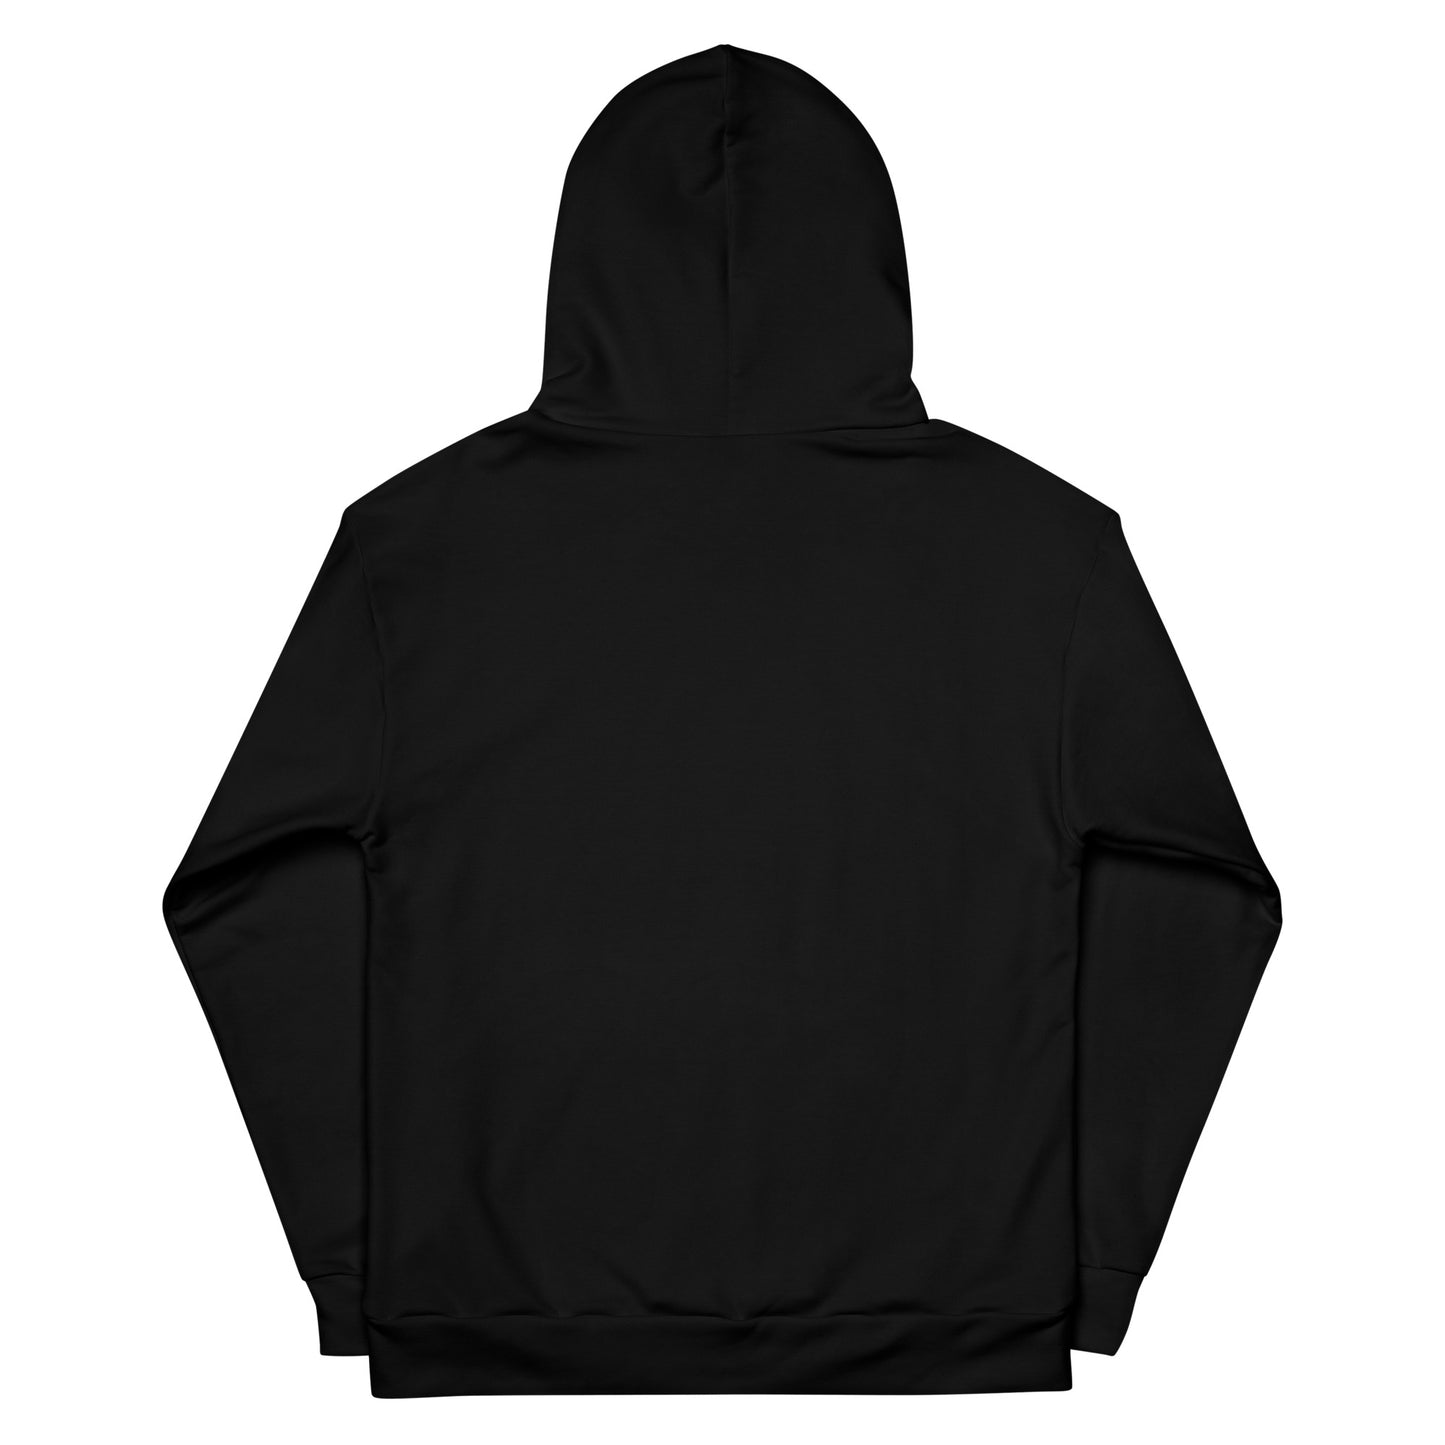 Ransomware Activist with Sleeve Hoodie